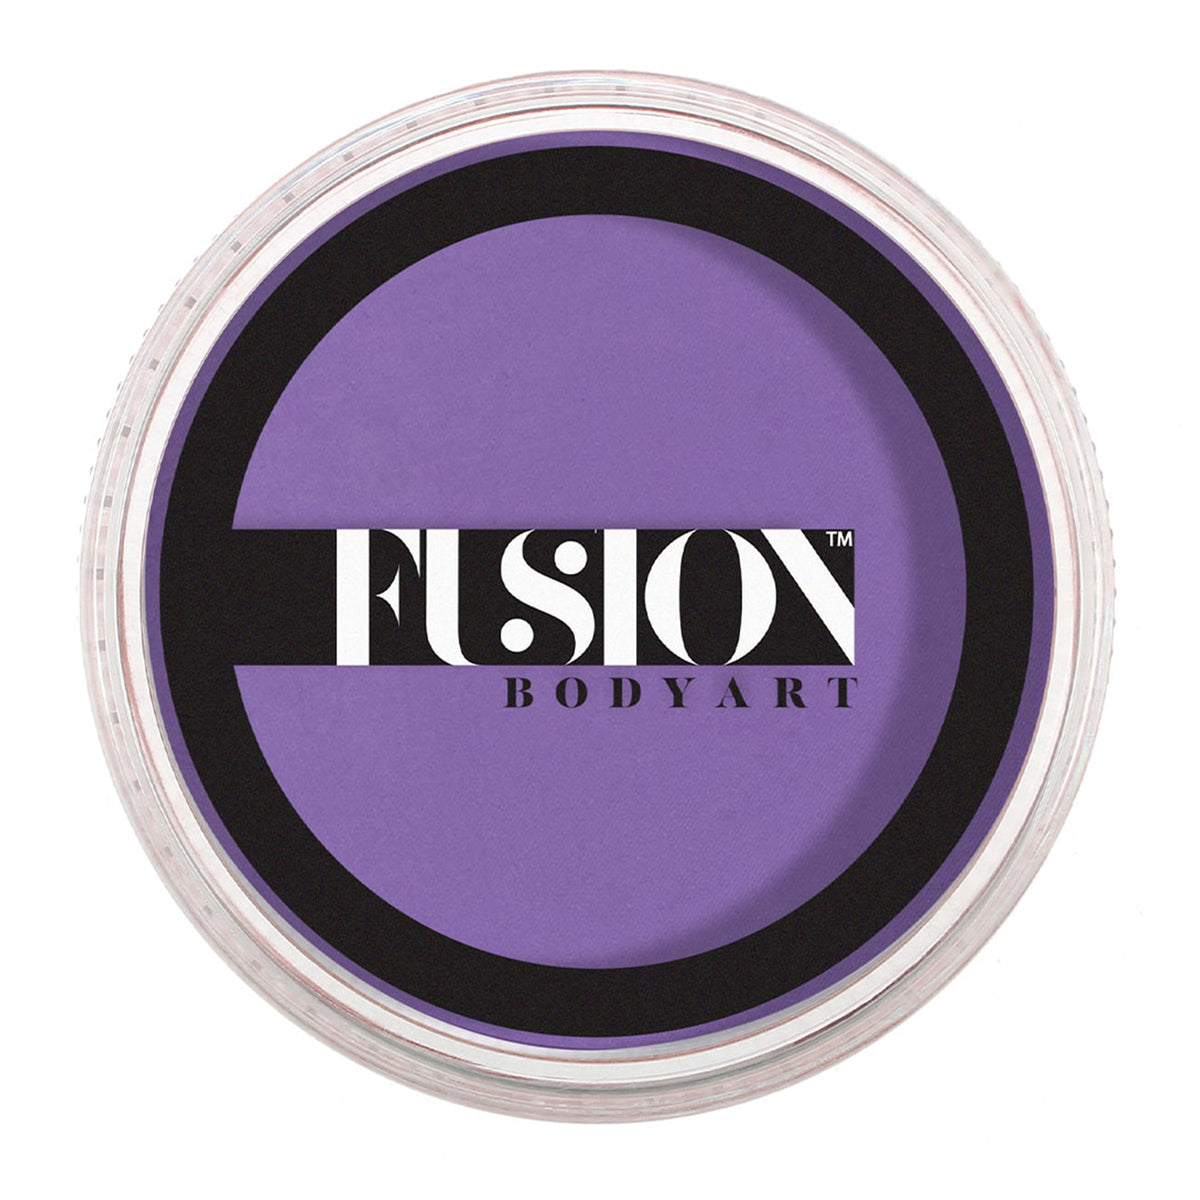 Fusion Body Art Face Paint - Prime Lovely Lilac